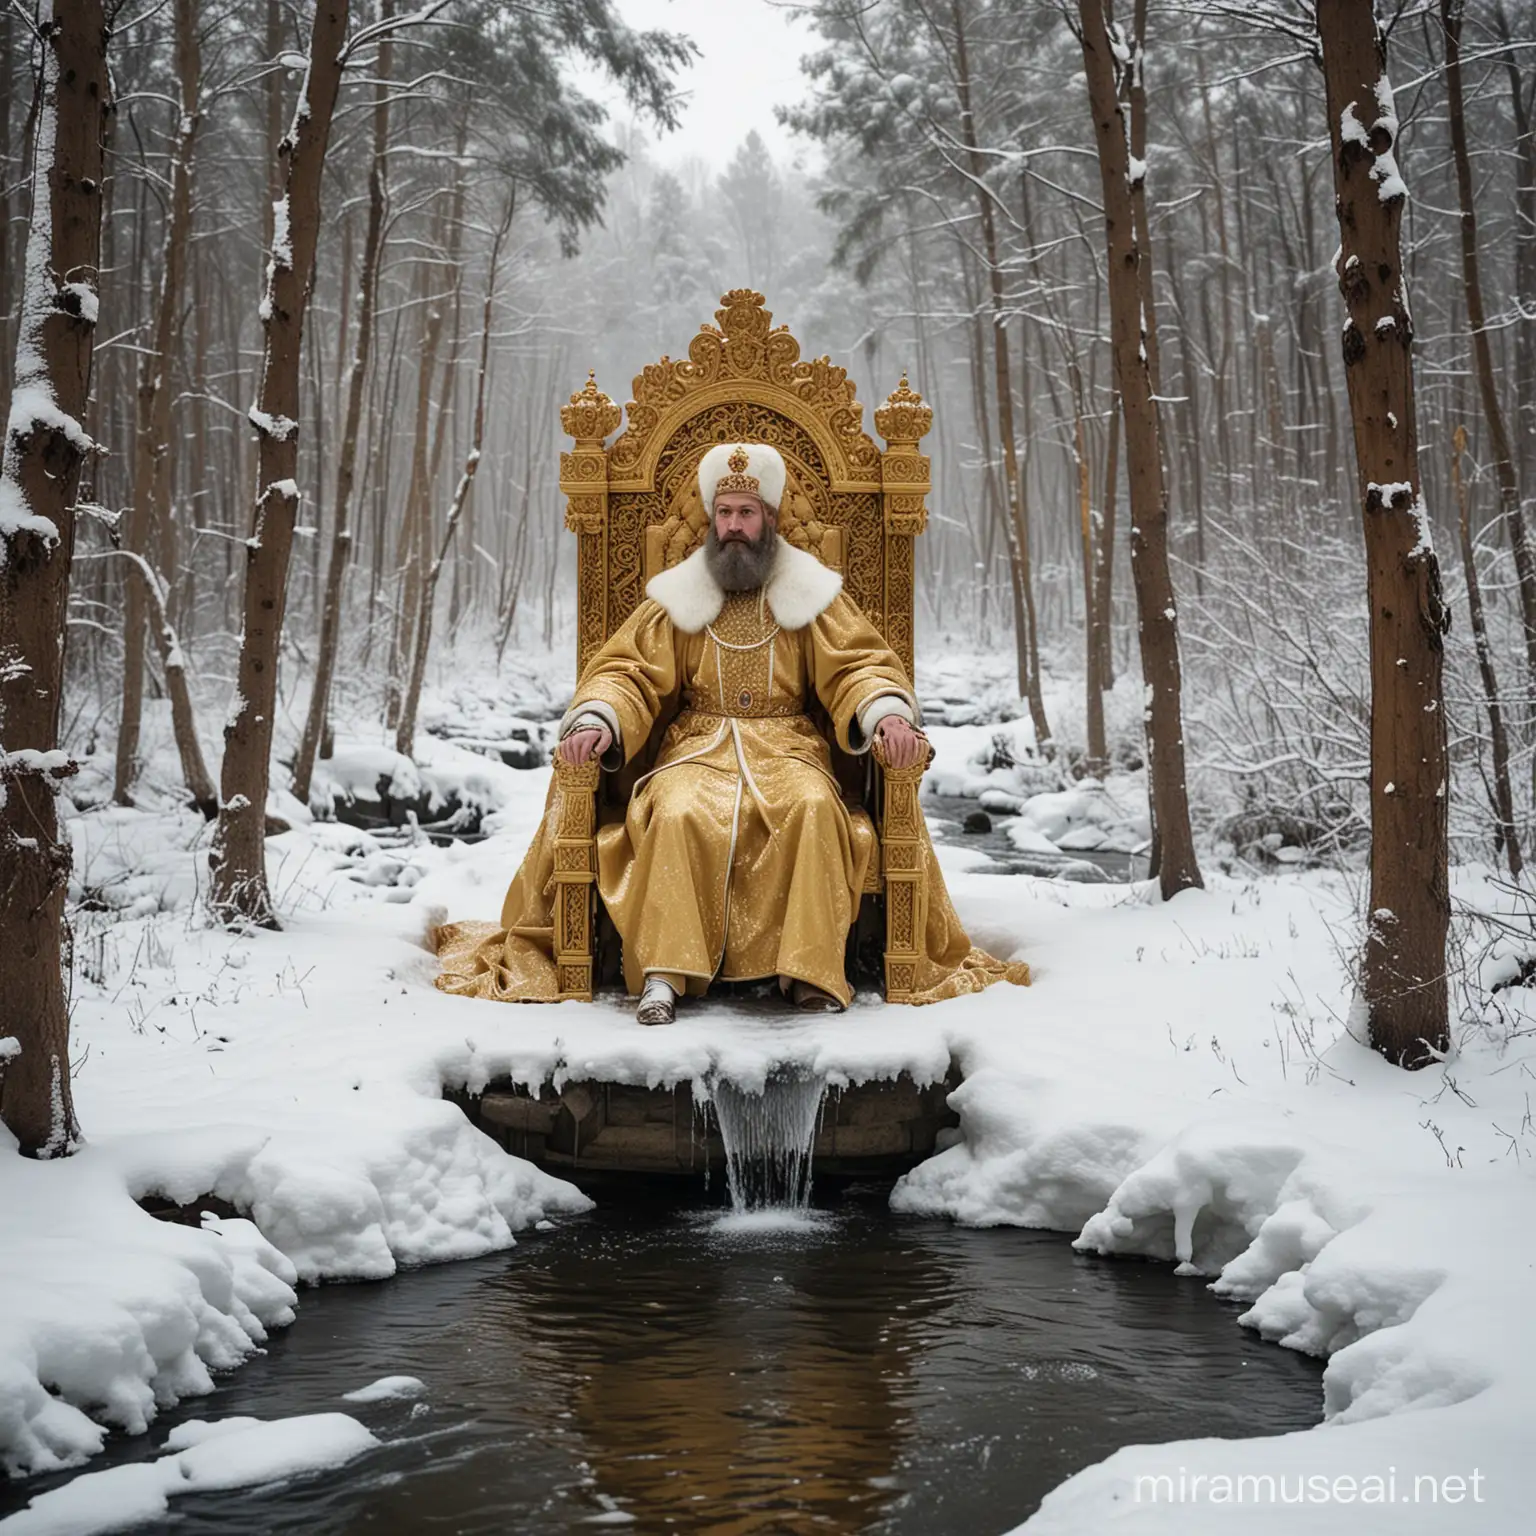 Tsar of Russia Seated on Golden Throne Amidst Snowy Forest with Jumping Fish Stream